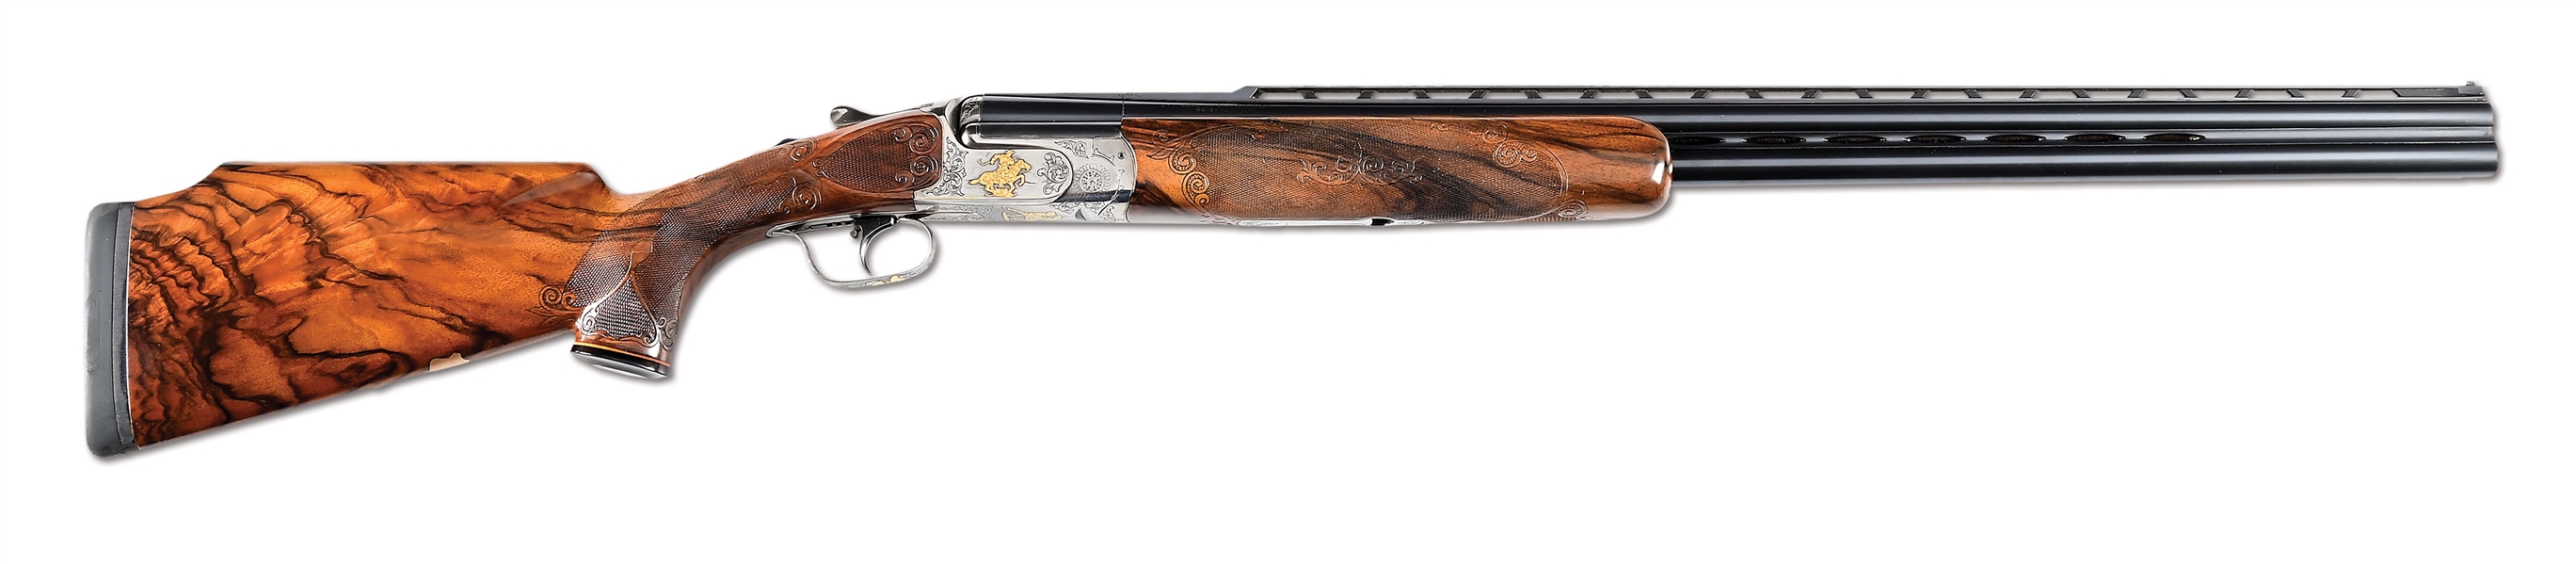 (M) STUNNING PERAZZI MX8 "THE BUFFALO BILL GUN" OVER/UNDER 12 GAUGE SHOTGUN WITH ENGRAVING AND GOLDWORK, SIGNED BY GINO CARGNEL.